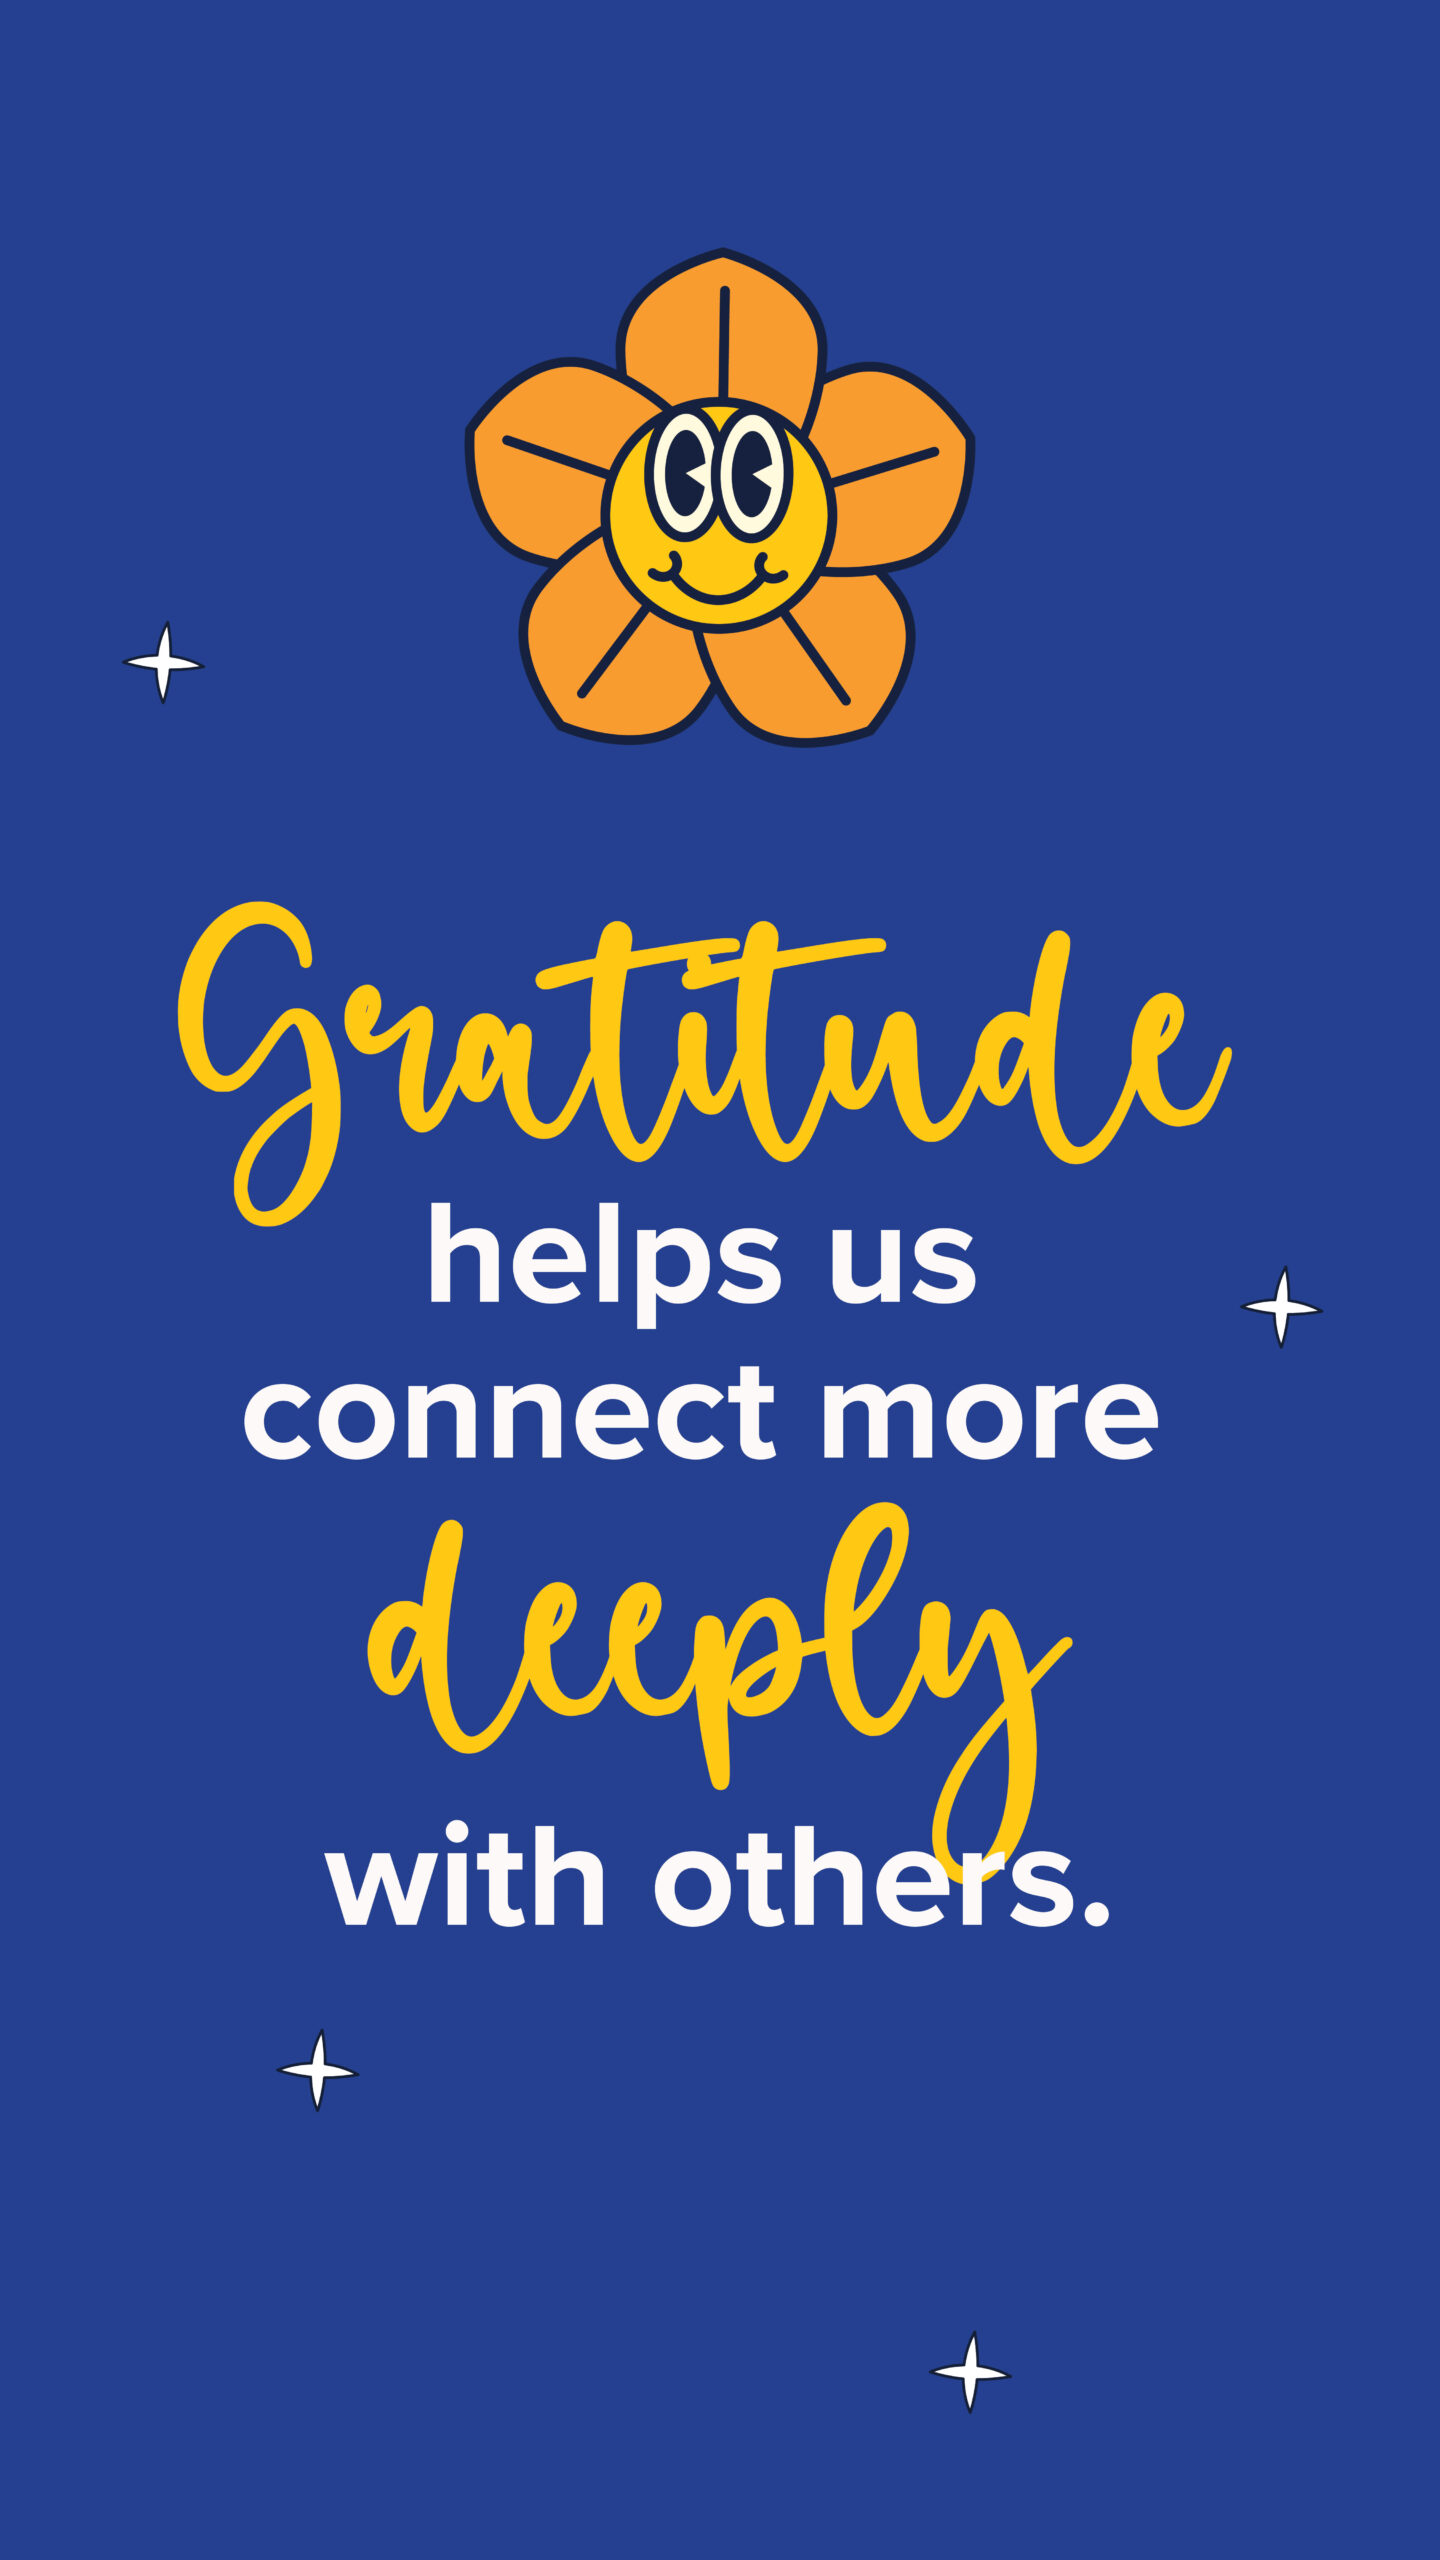 Gratitude helps us connect more deeply with others. with flower graphics